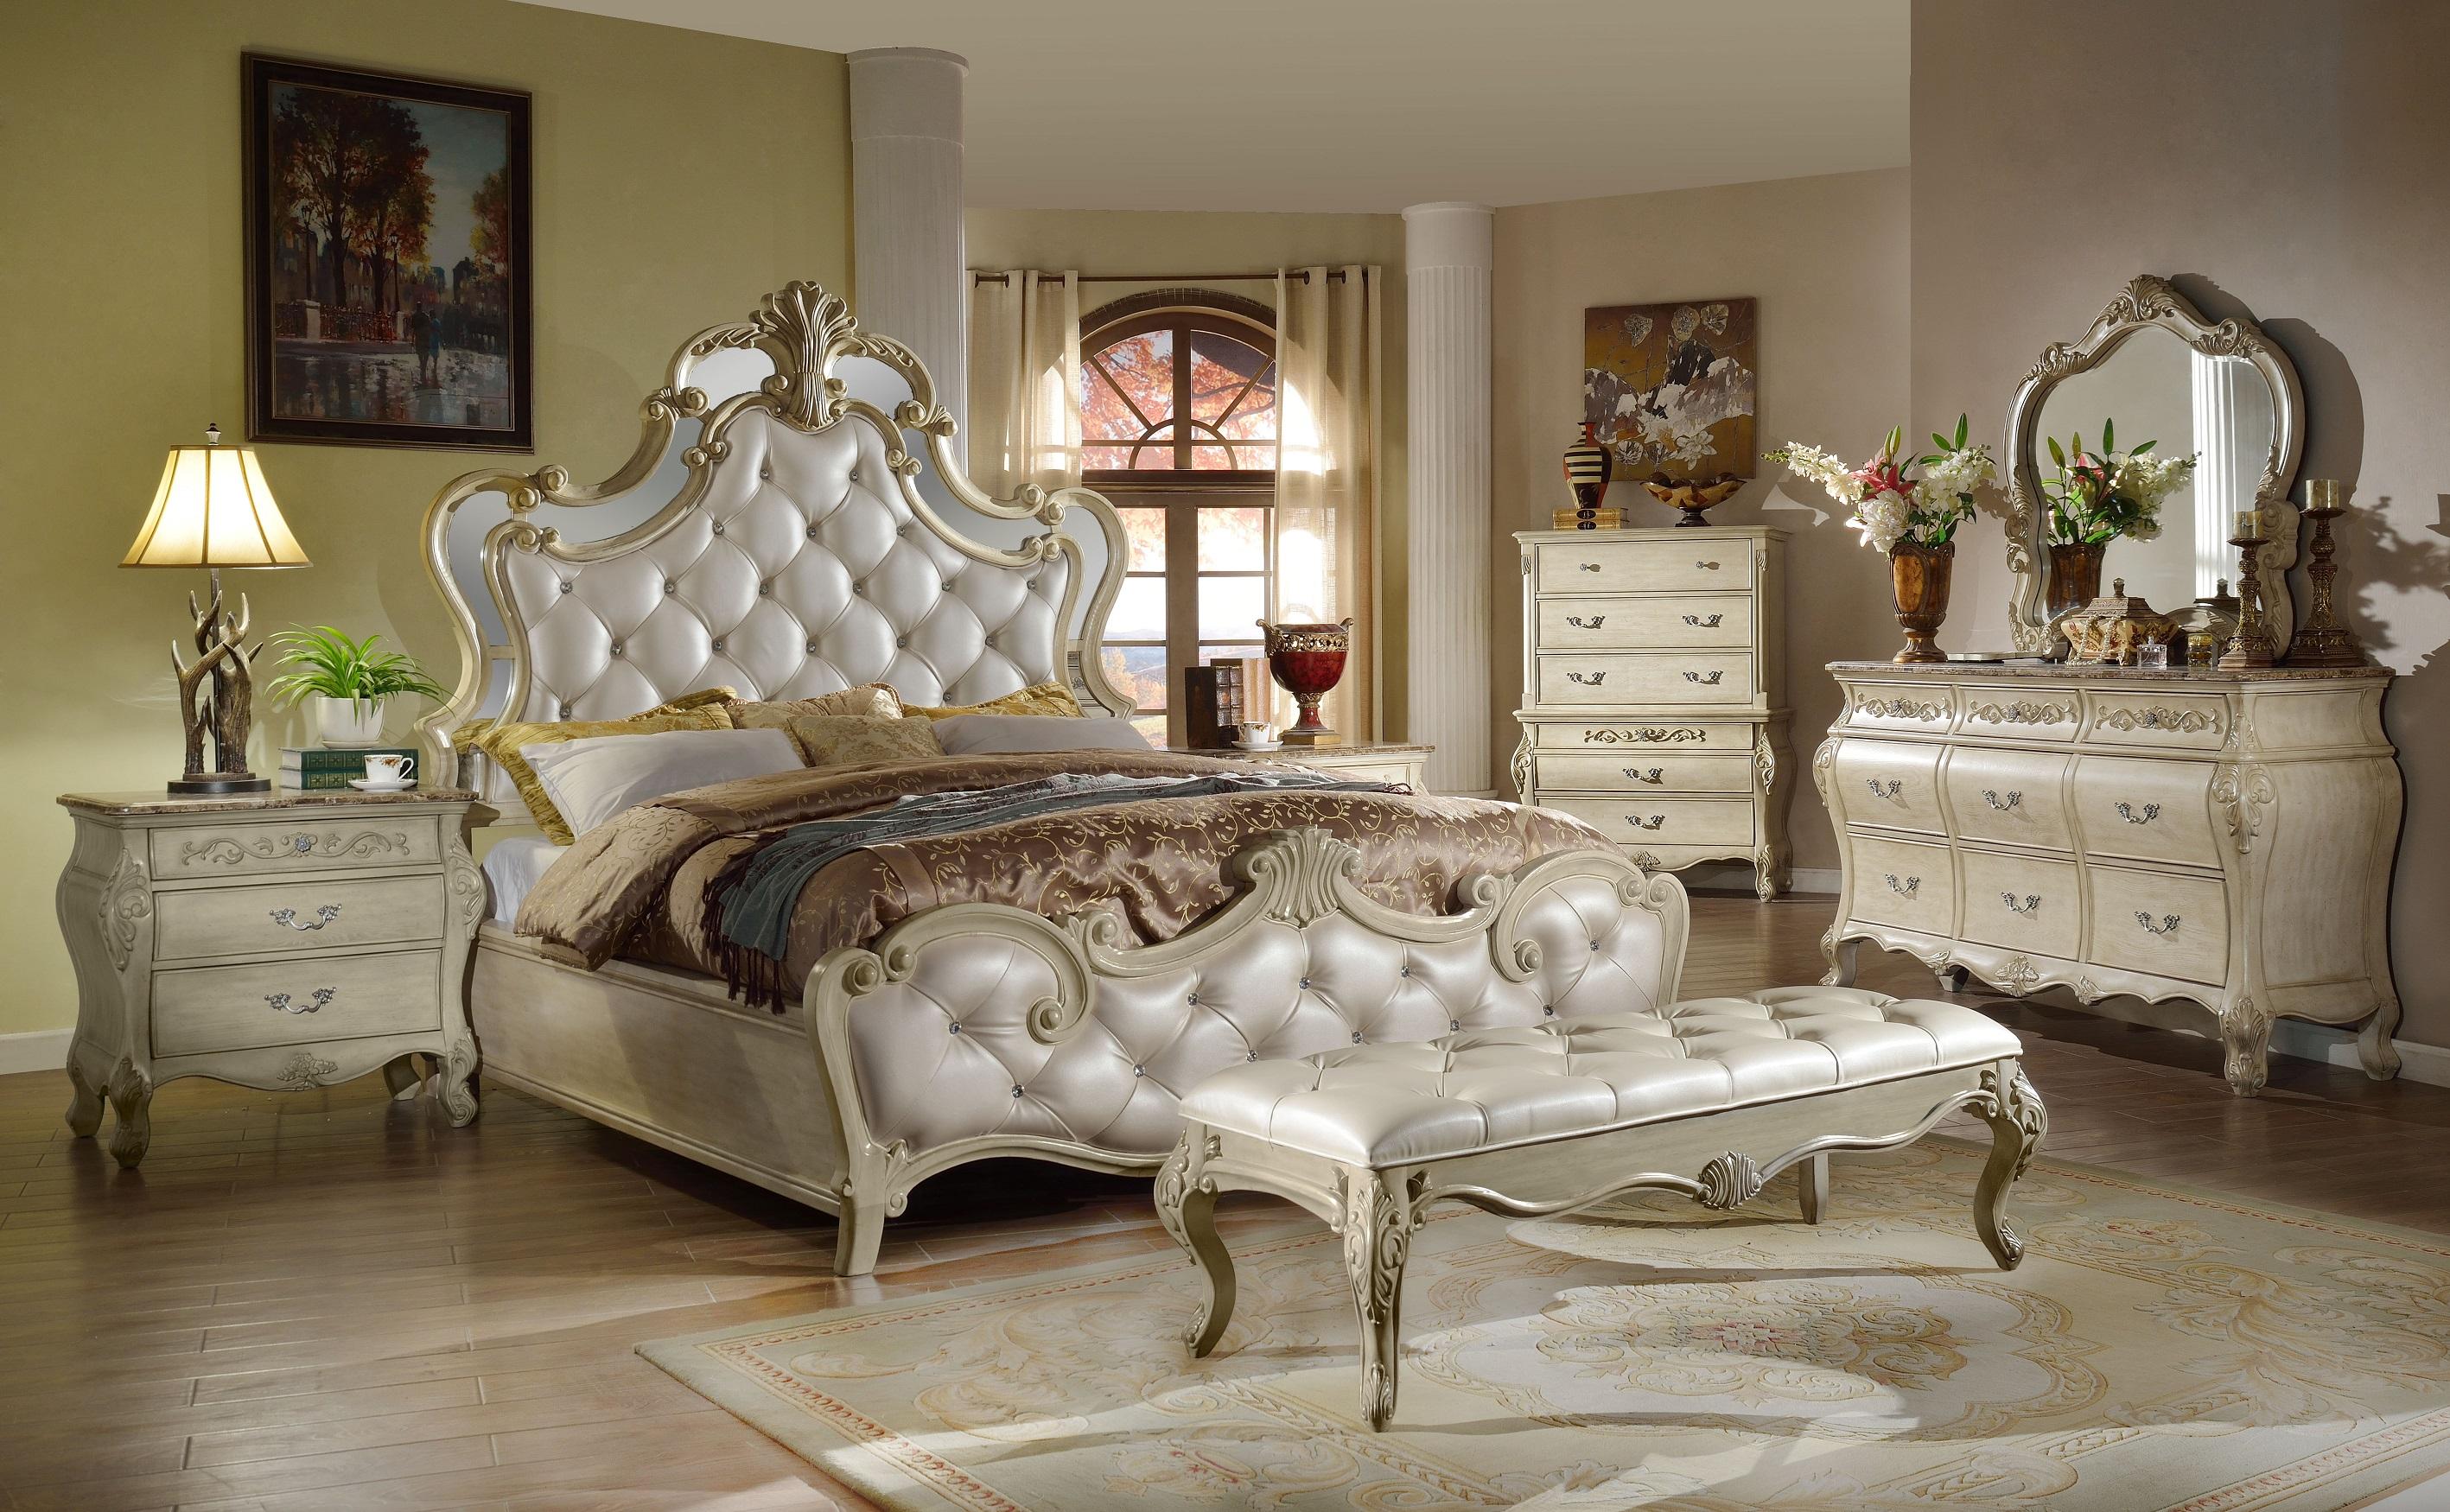 

    
McFerran B8305 Antique White Glamour Tufted Fabric Queen Bedroom Set 5Pcs
